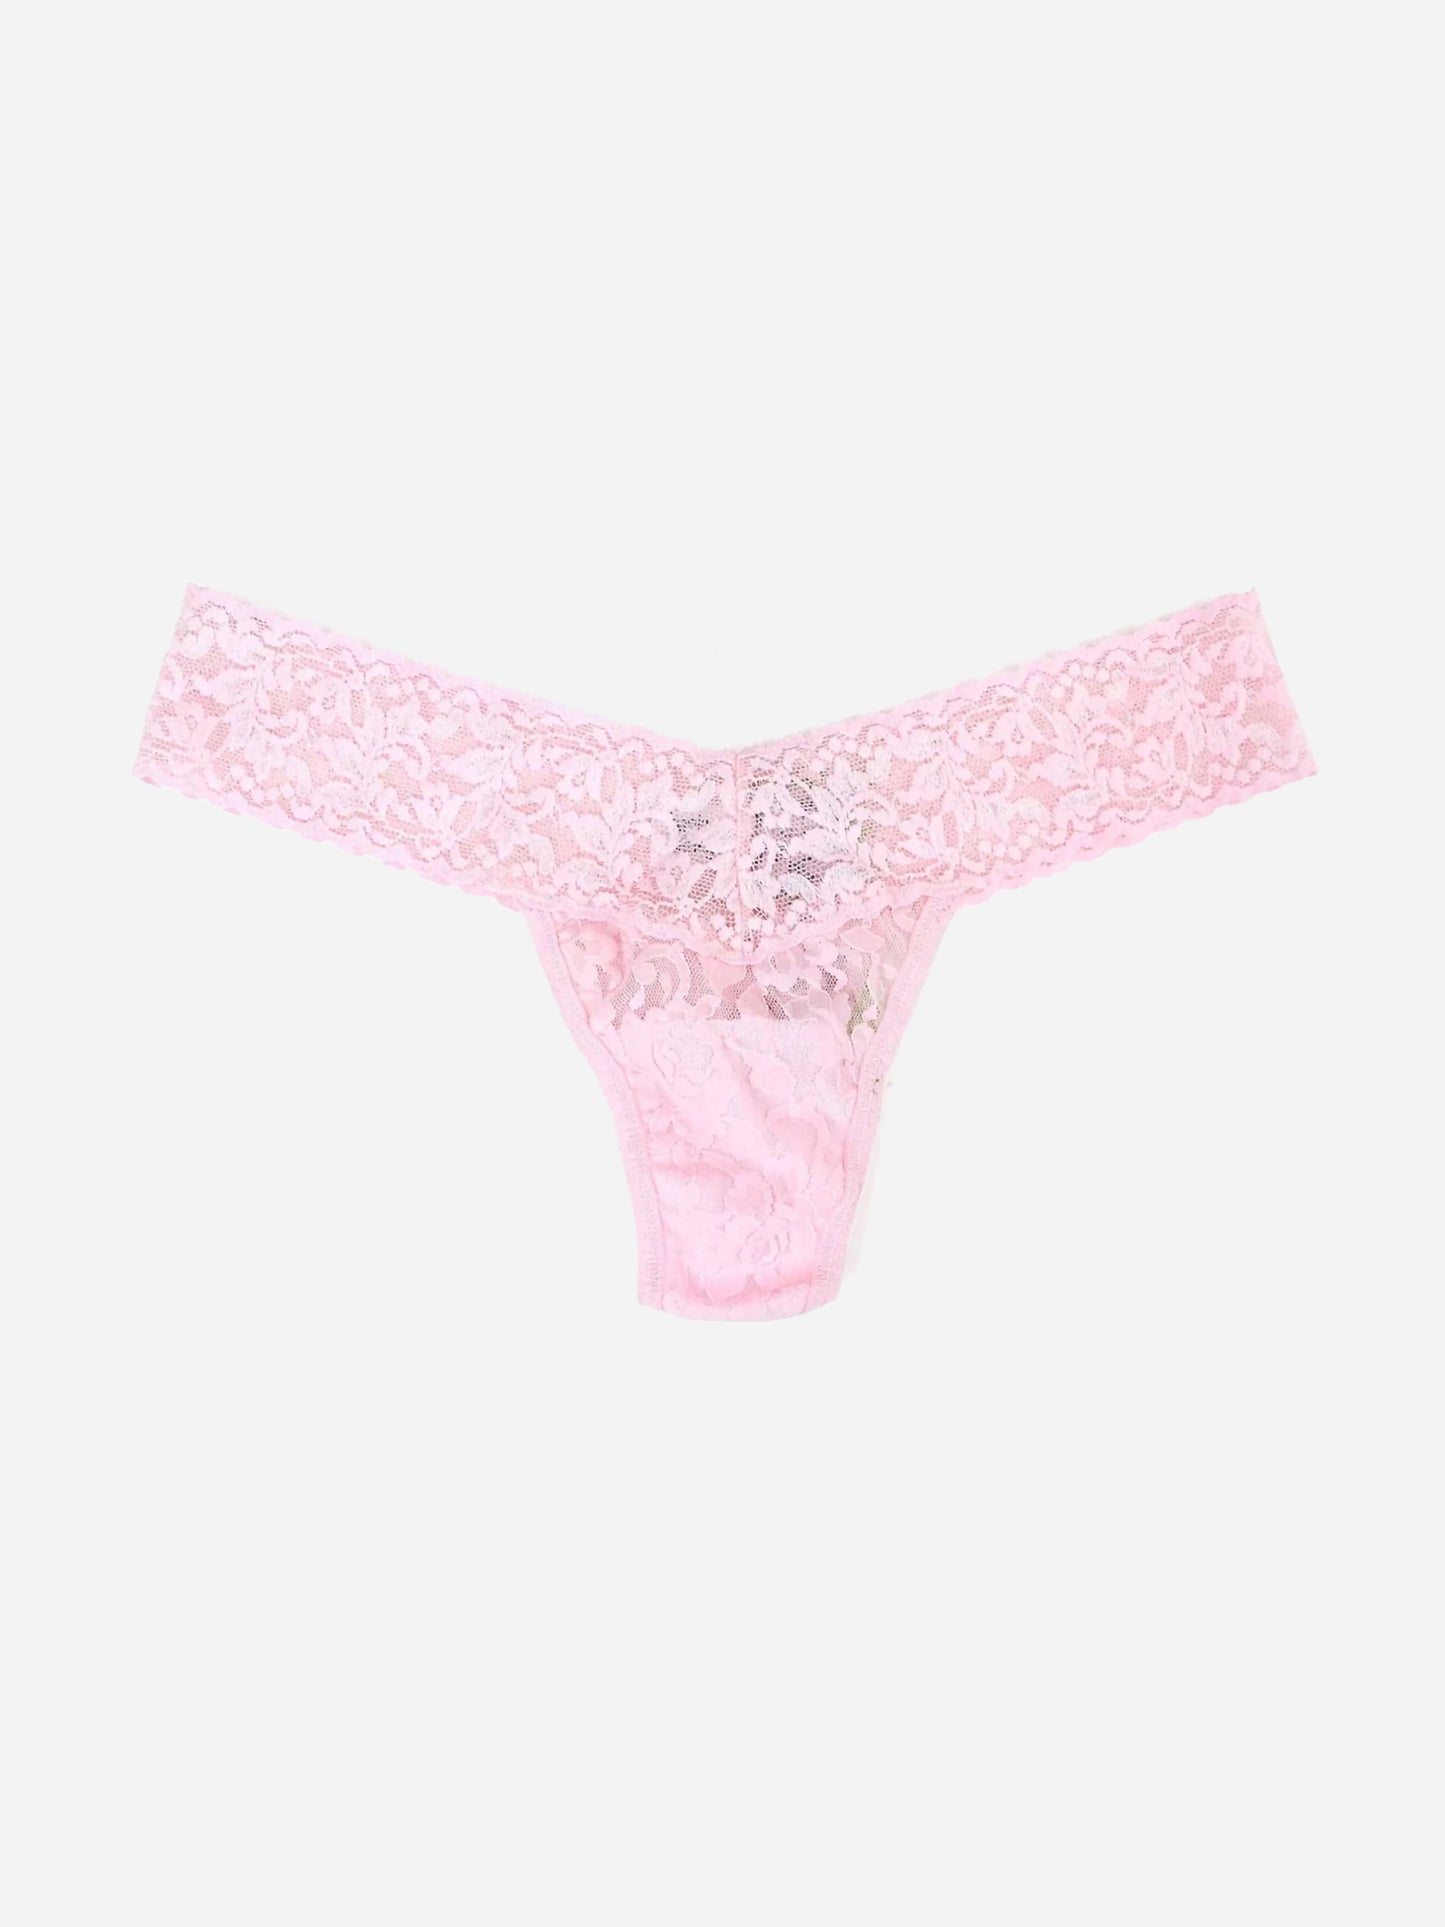 Hanky Panky Women's Signature Lace Low Rise Thong